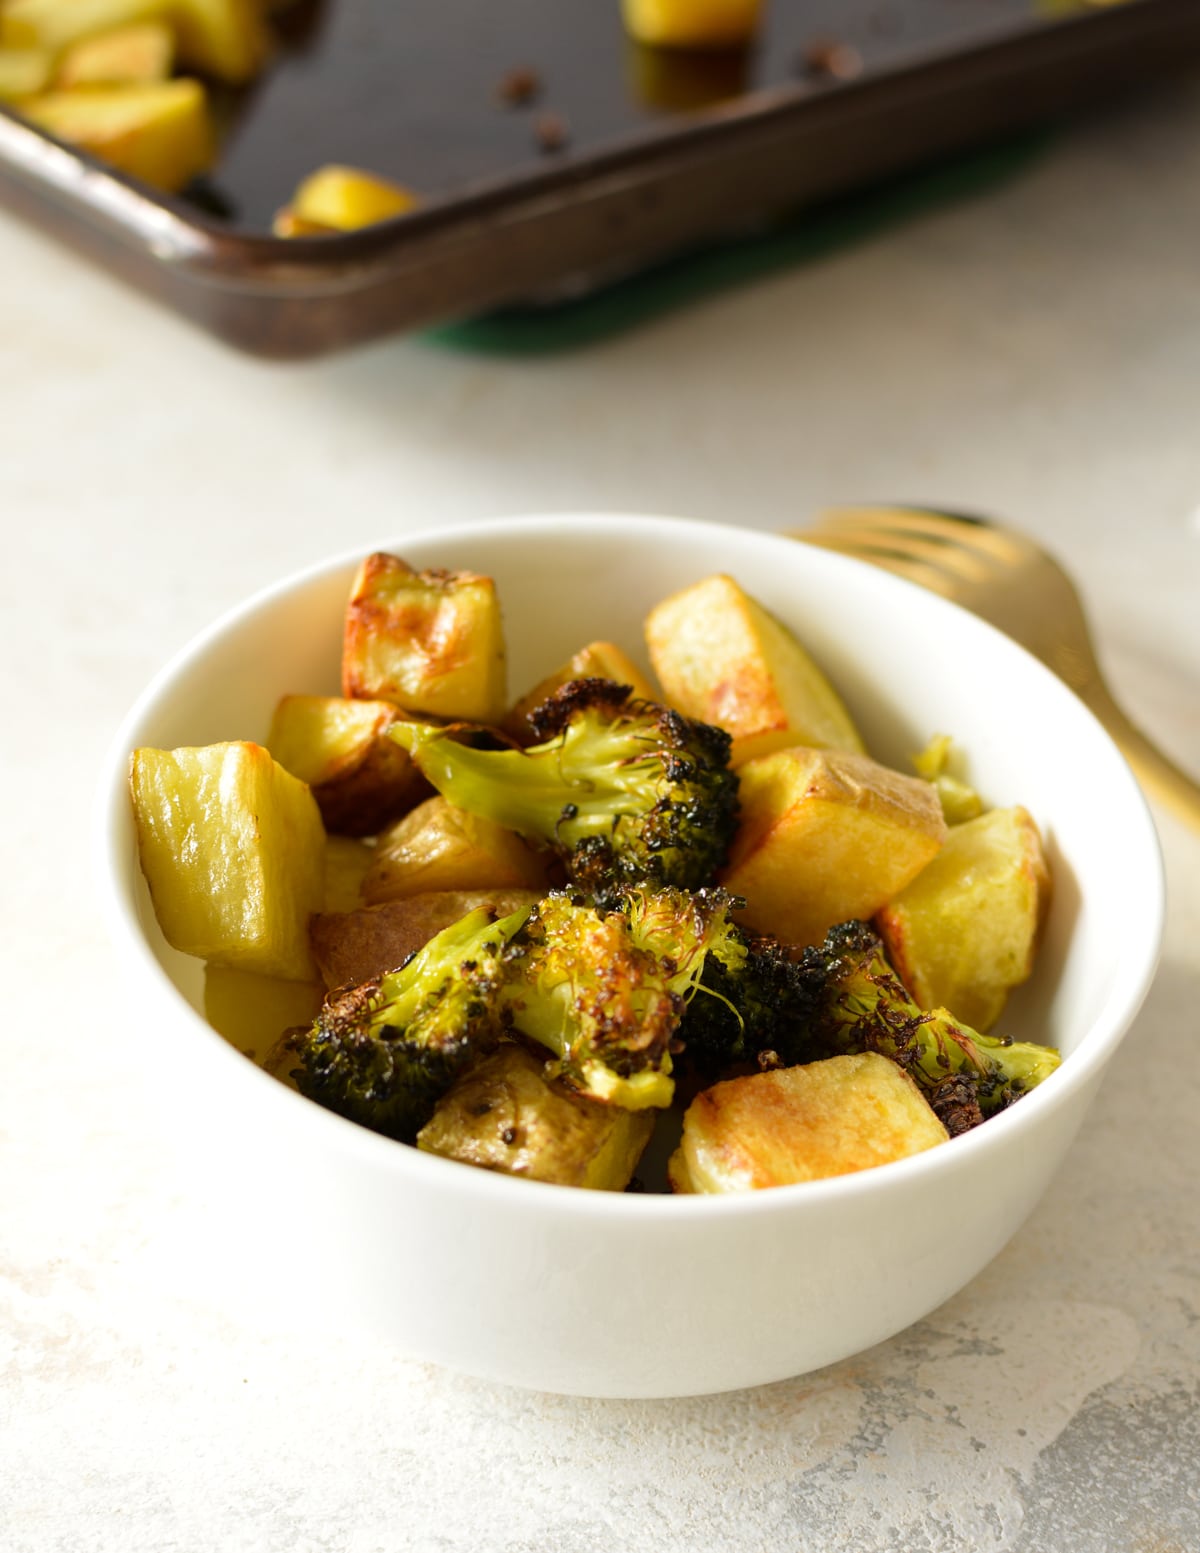 a bowl of roasted potatoes and broccoli.